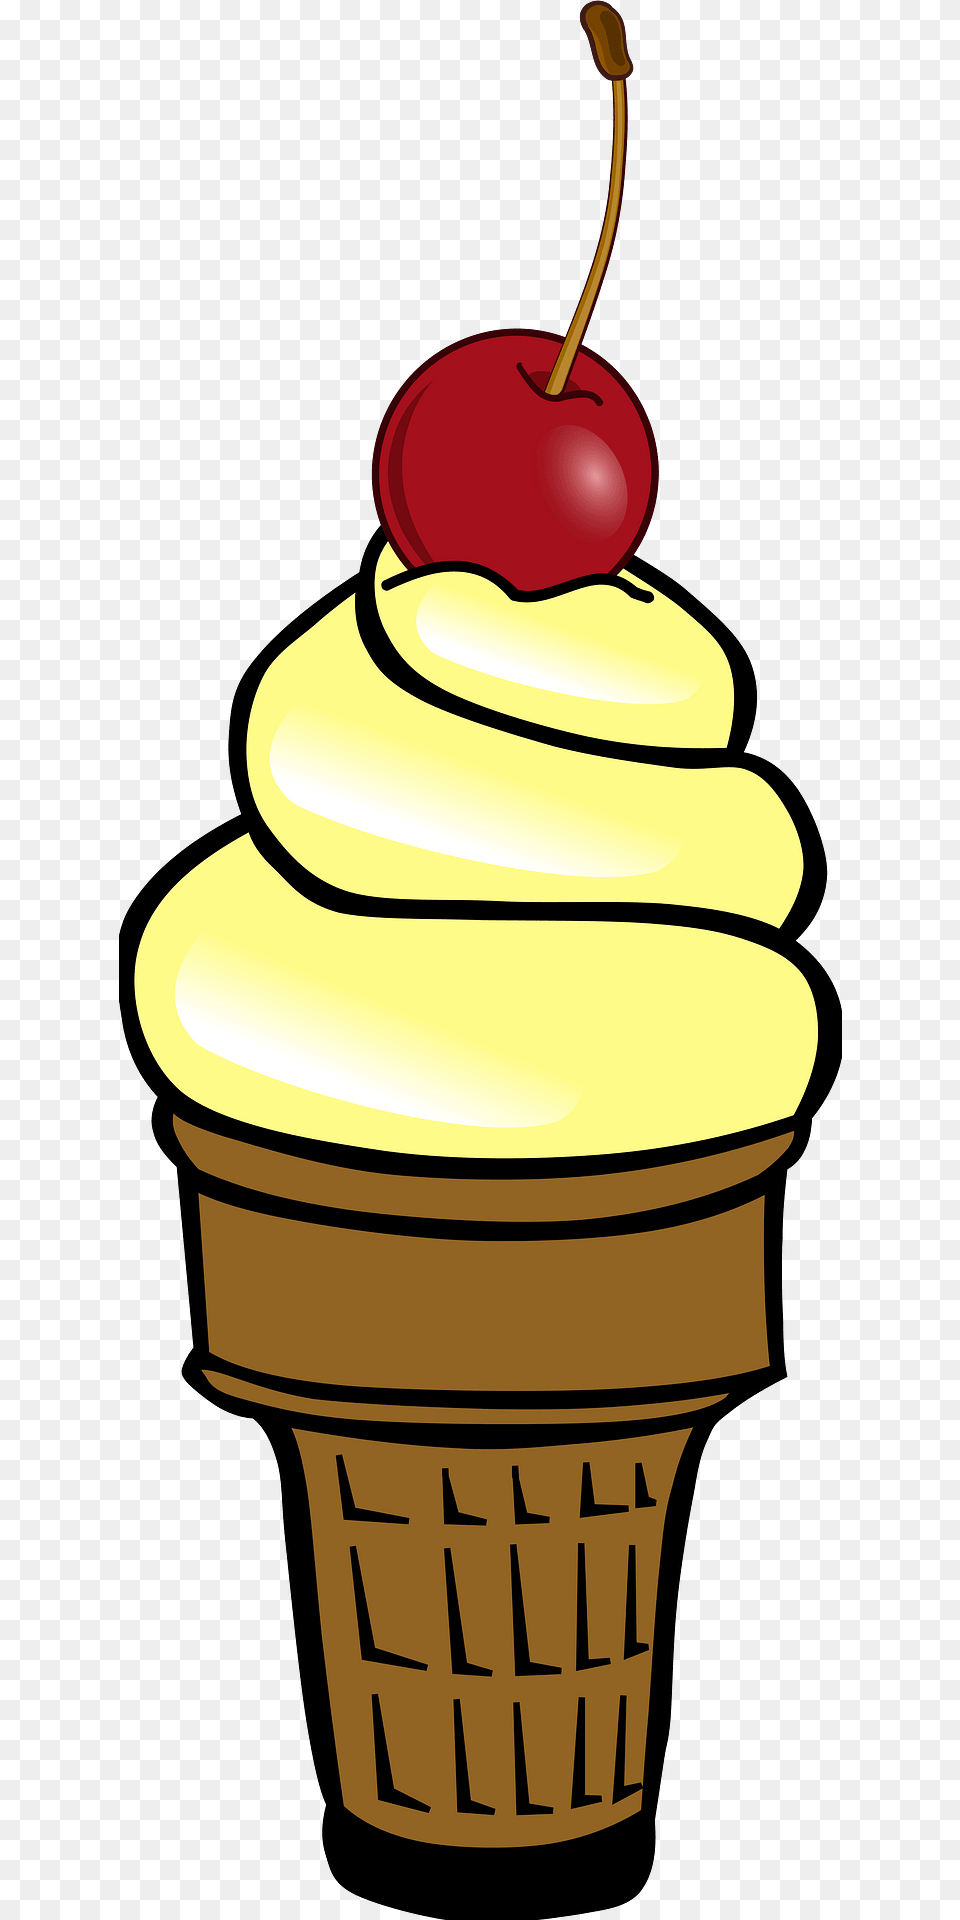 Soft Serve Ice Cream Cone With Cherry On Top Clipart, Dessert, Food, Ice Cream, Cake Free Transparent Png